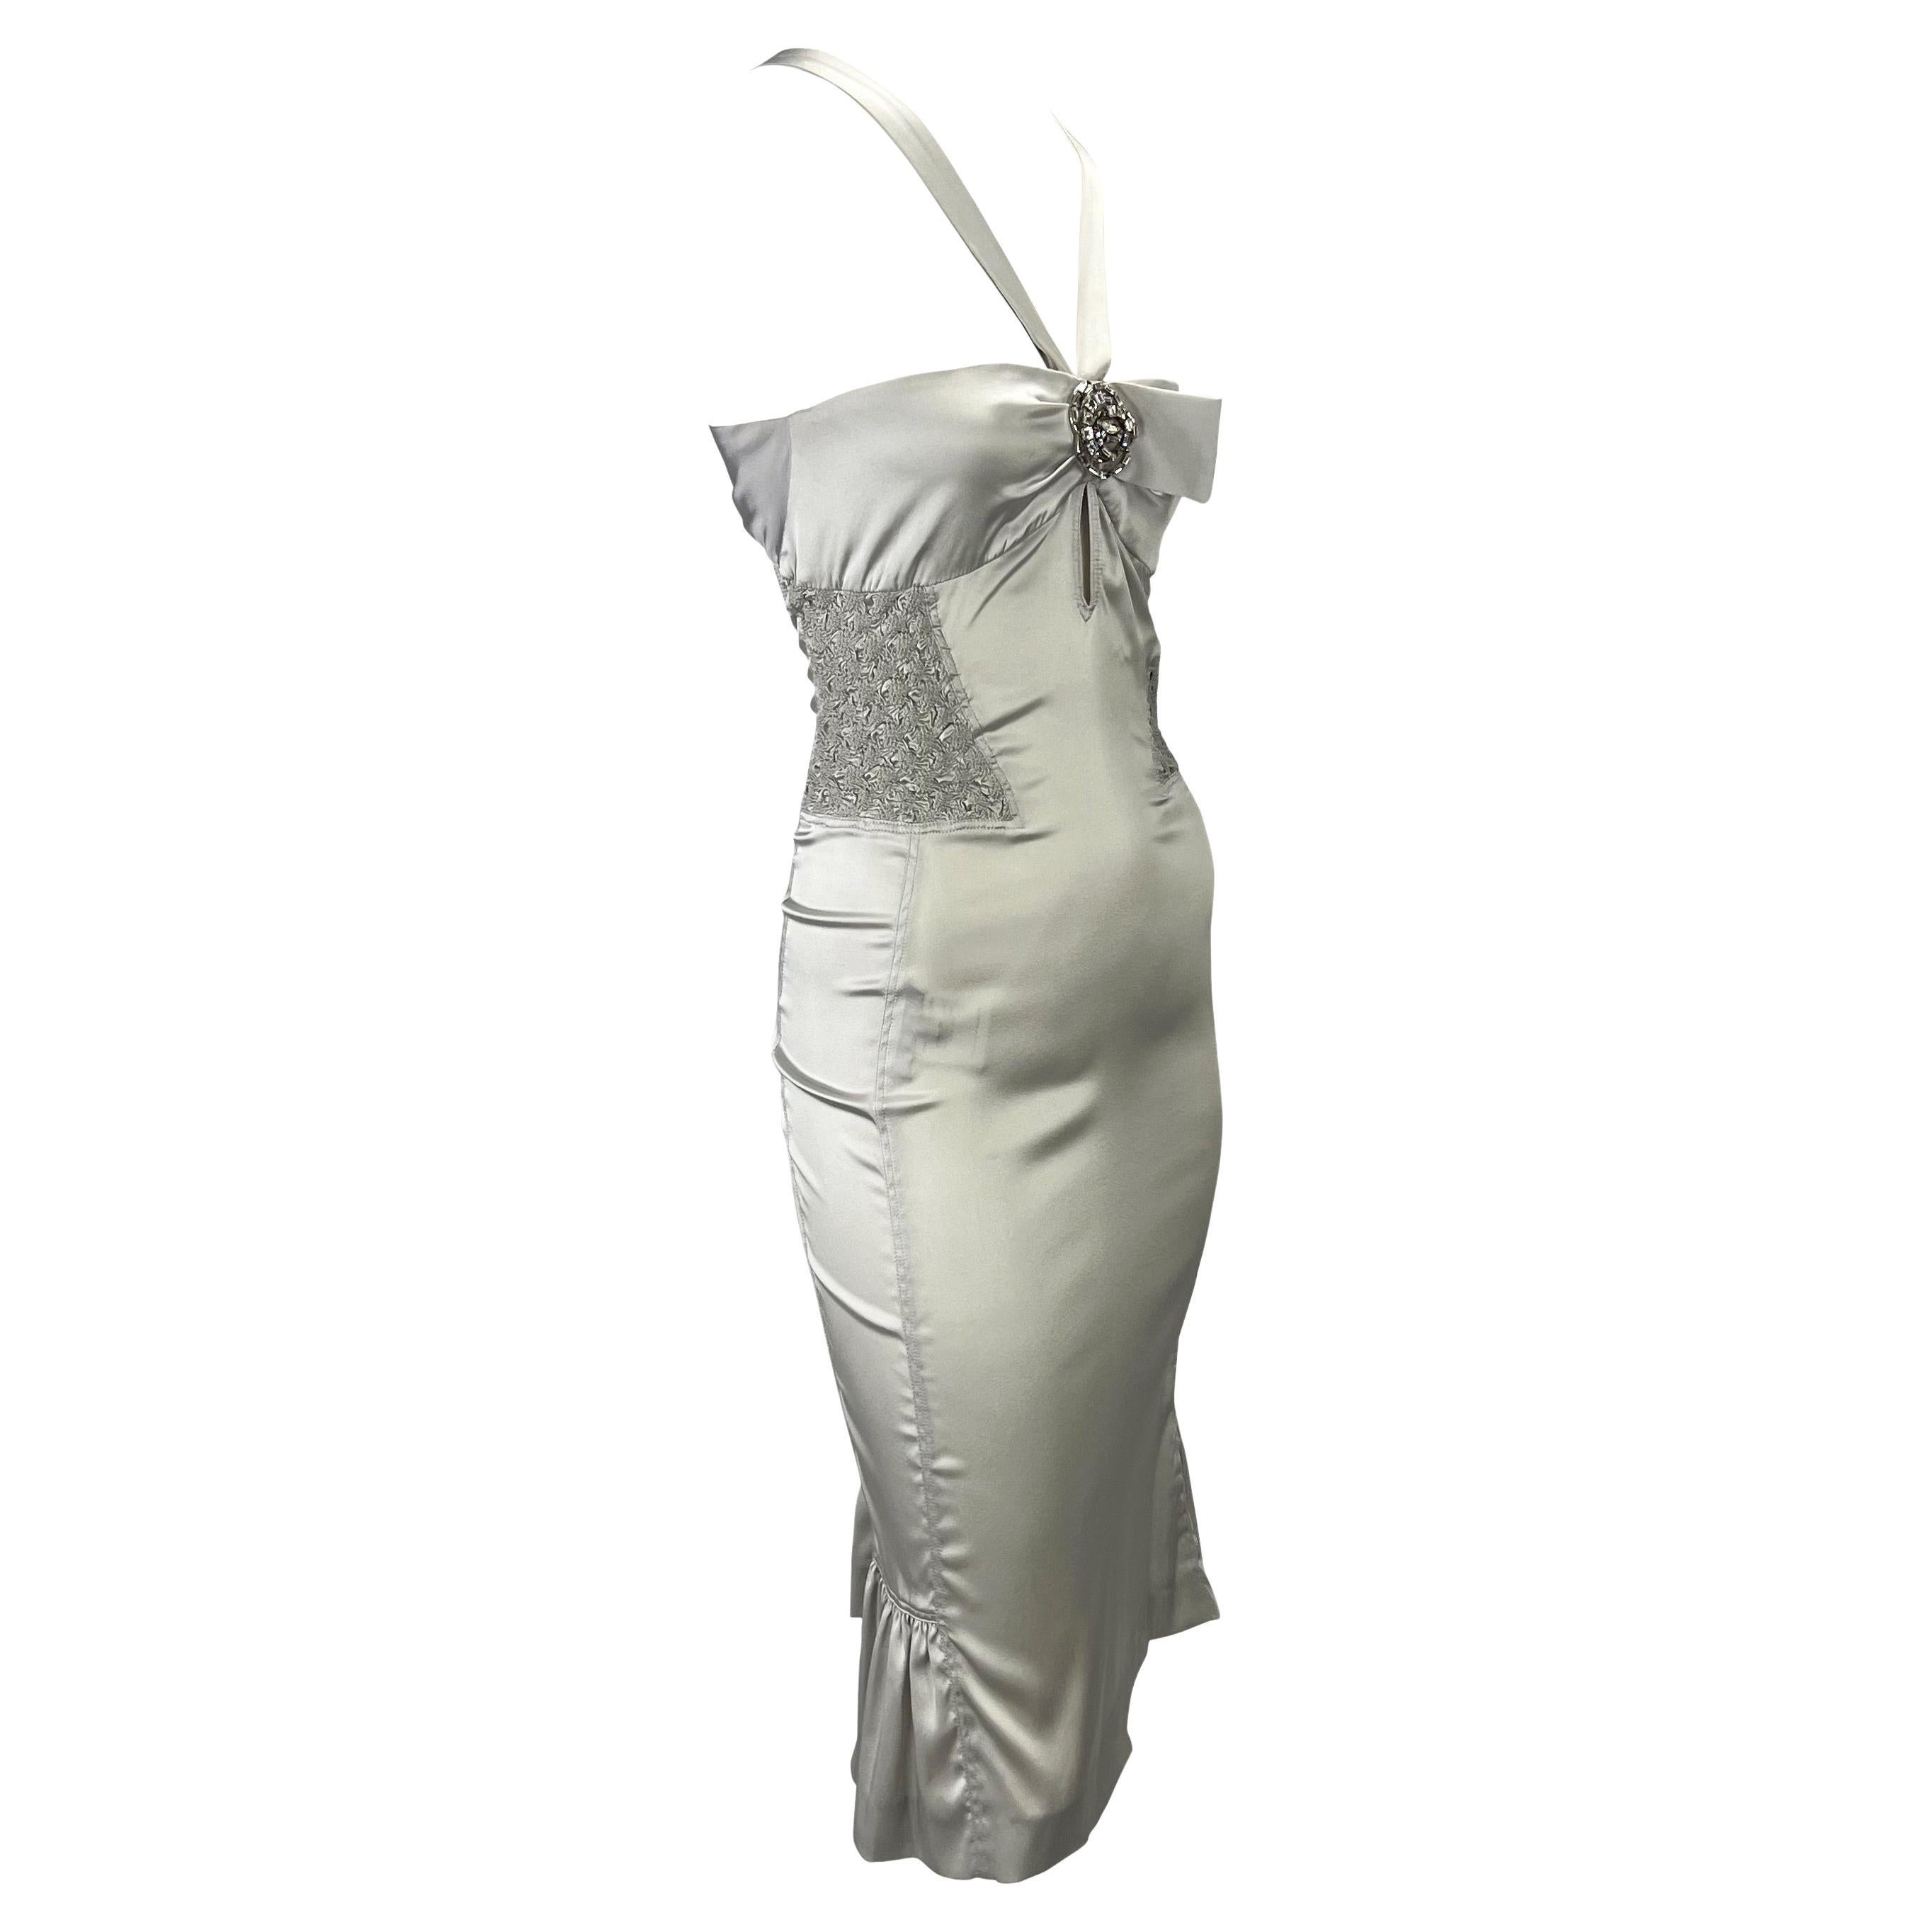 S/S 2004 Gucci by Tom Ford Backless Rhinestone Ruched Silver Silk Strap Dress In Excellent Condition For Sale In West Hollywood, CA